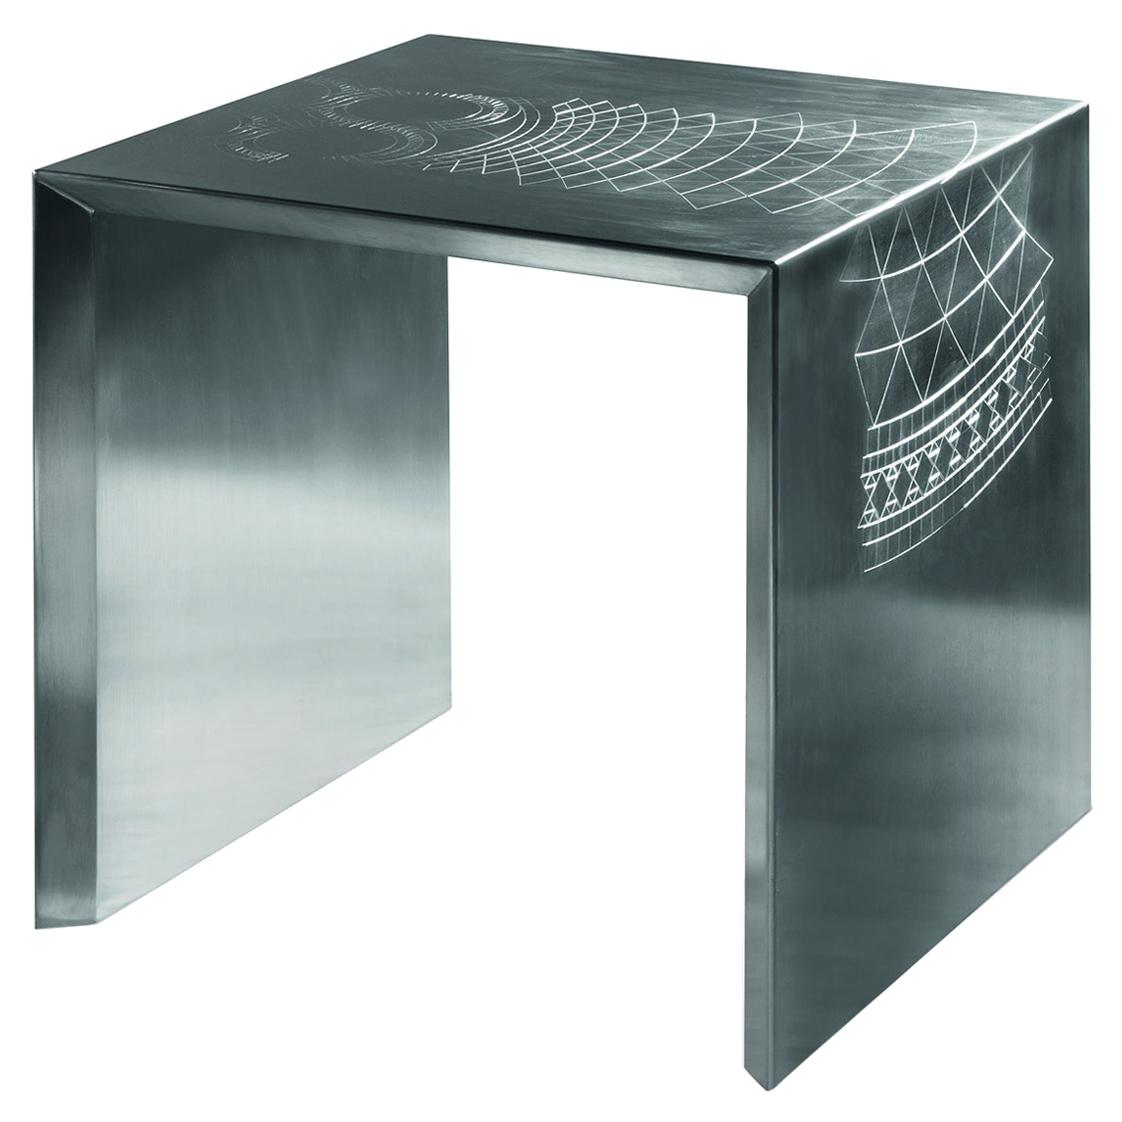 Stylish Side Table in Satin Stainless Steel with Decorative Engravings